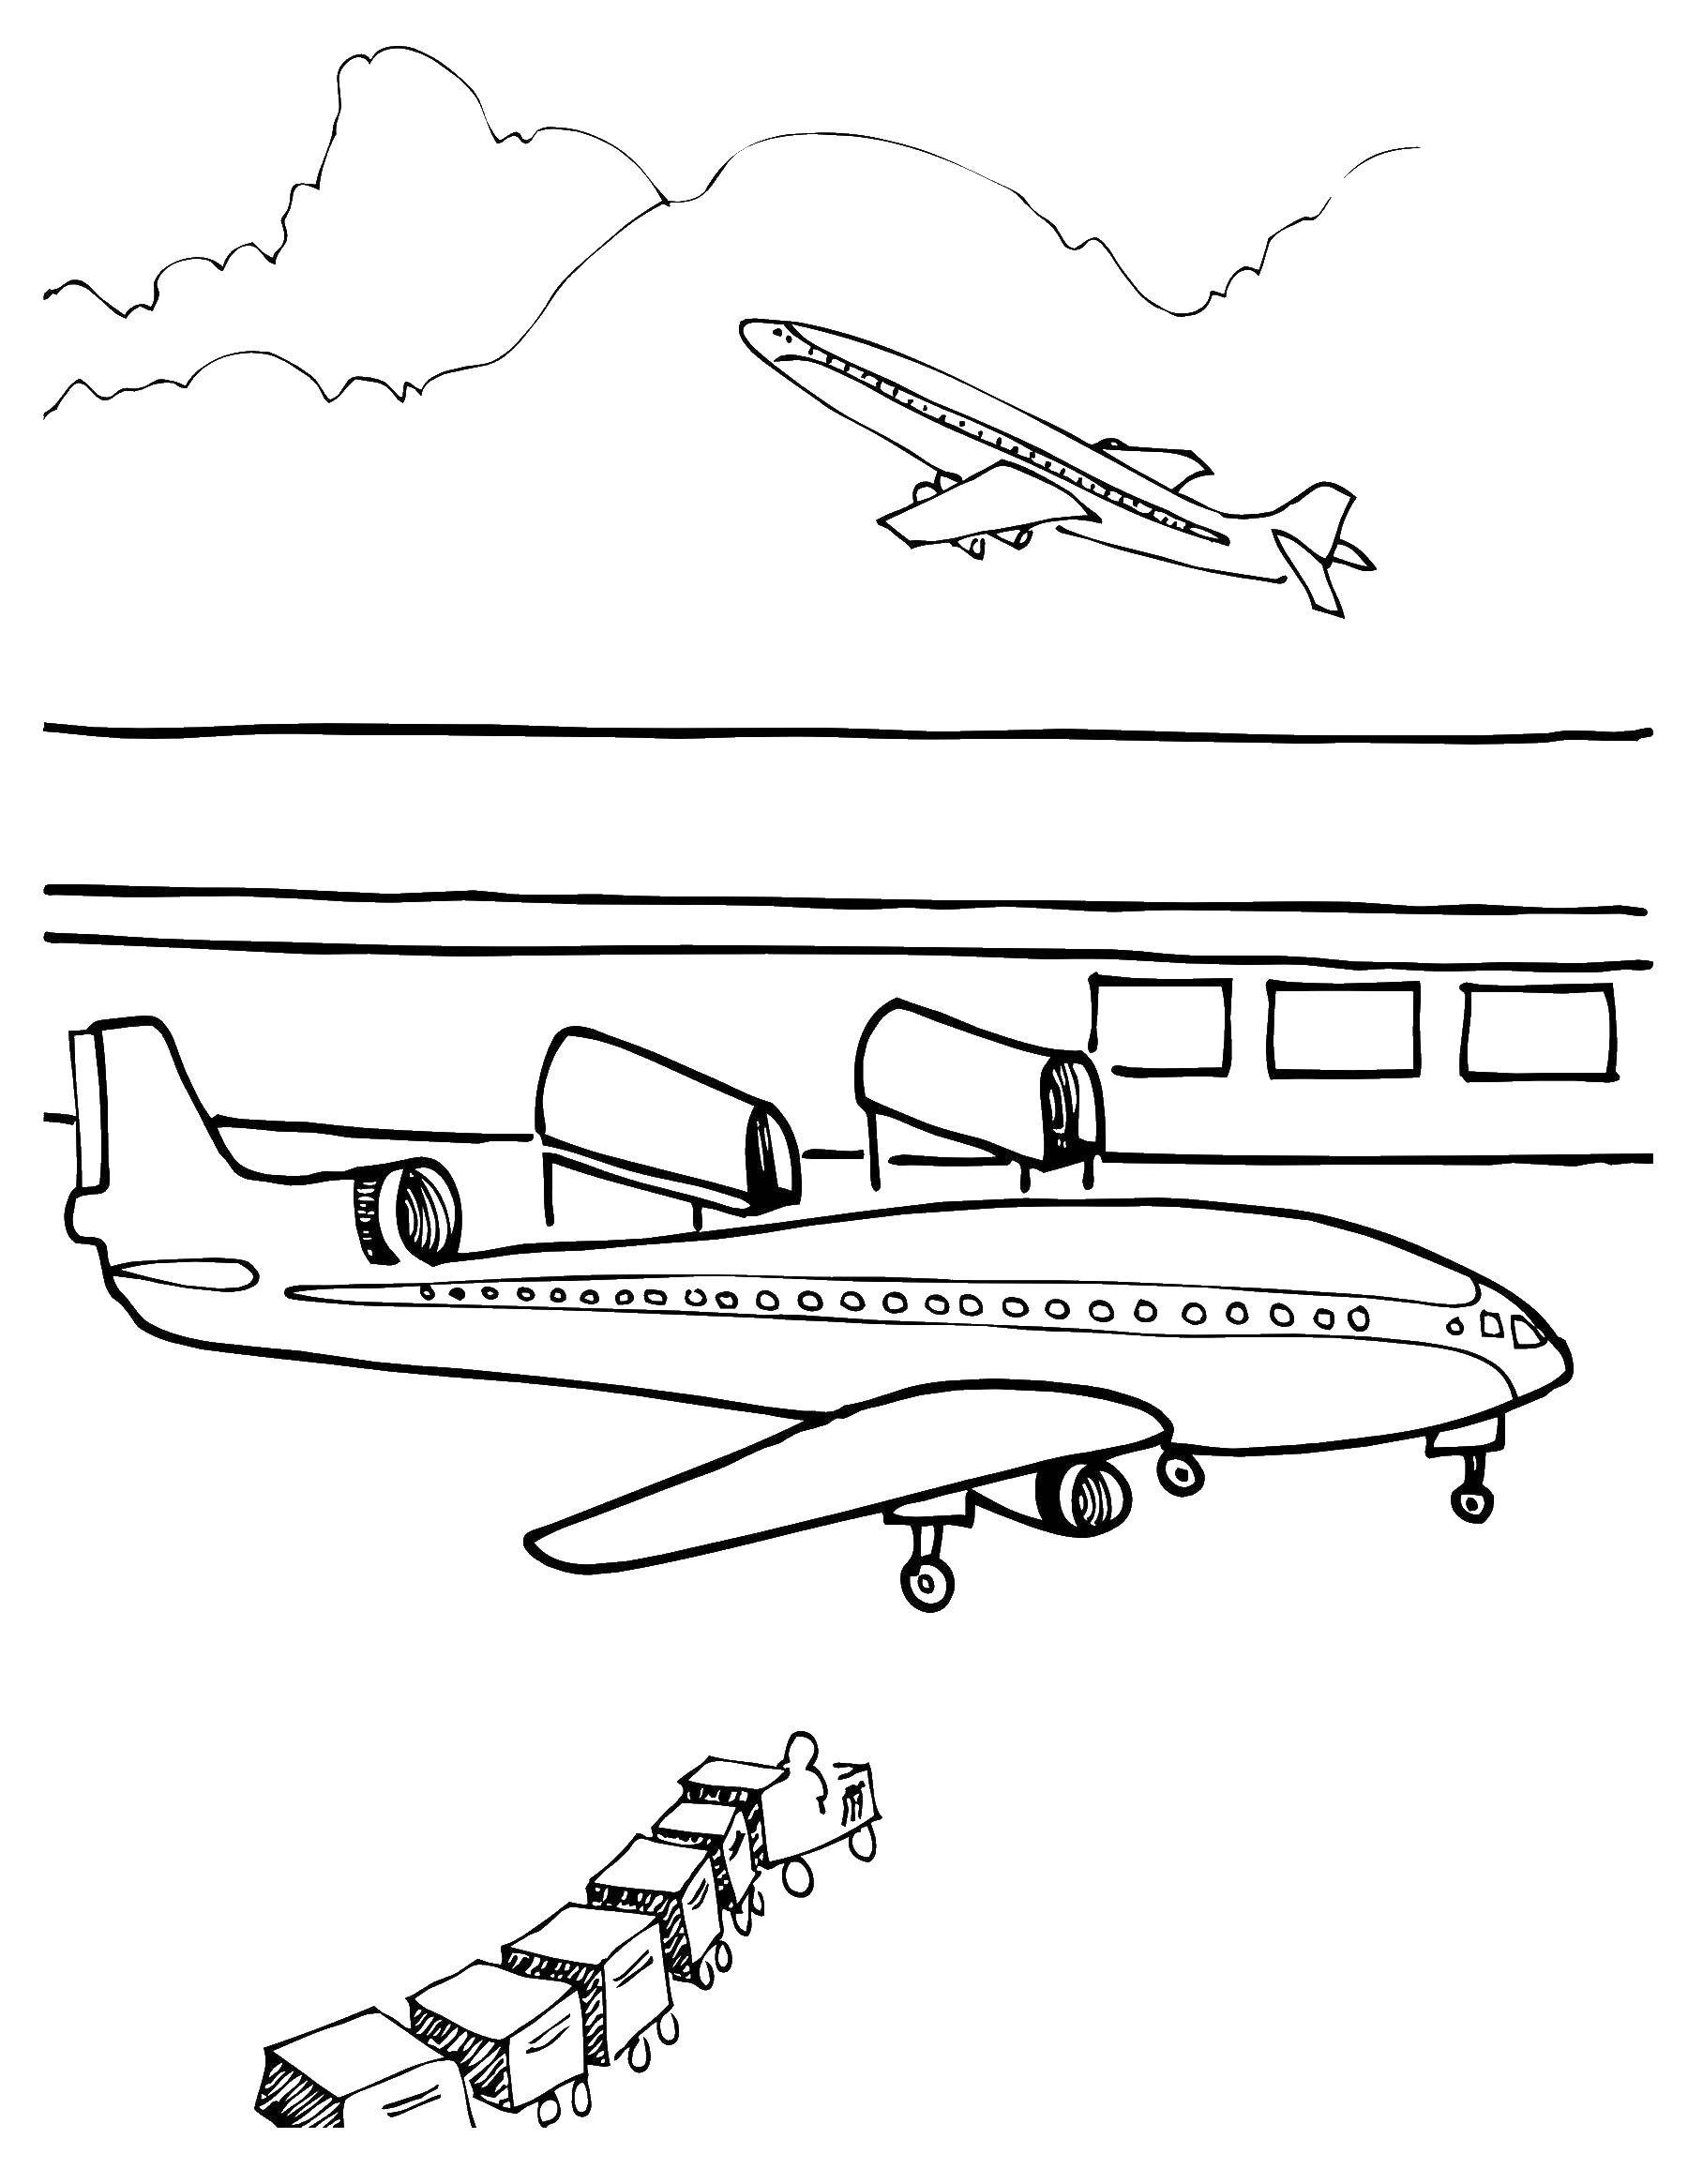 Coloring Airport. Category The planes. Tags:  Plane.